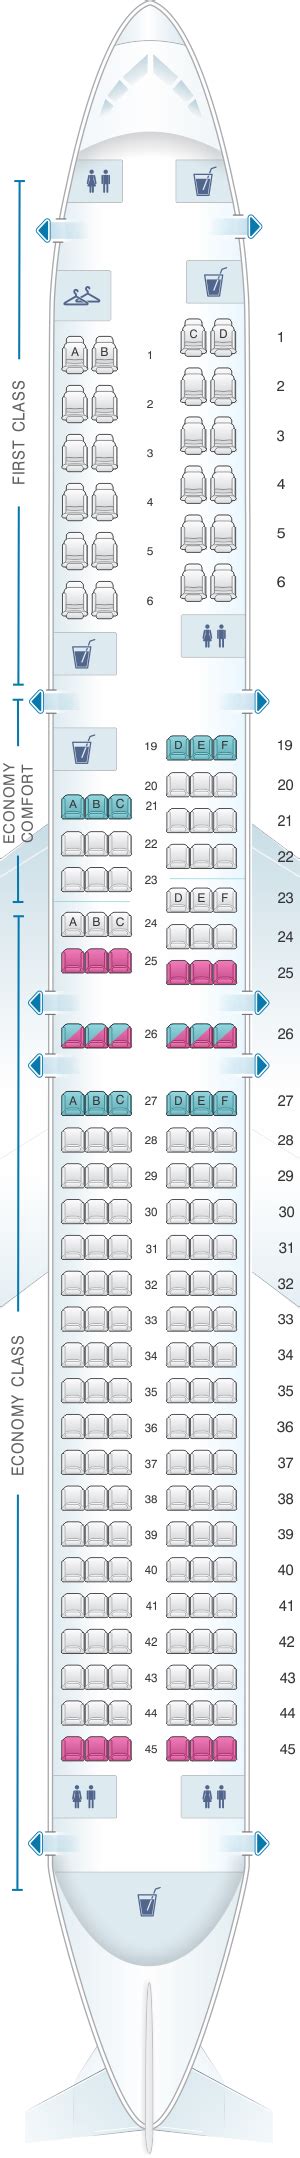 Seat Map Boeing Delta Airlines Best Seats In Plane Images And